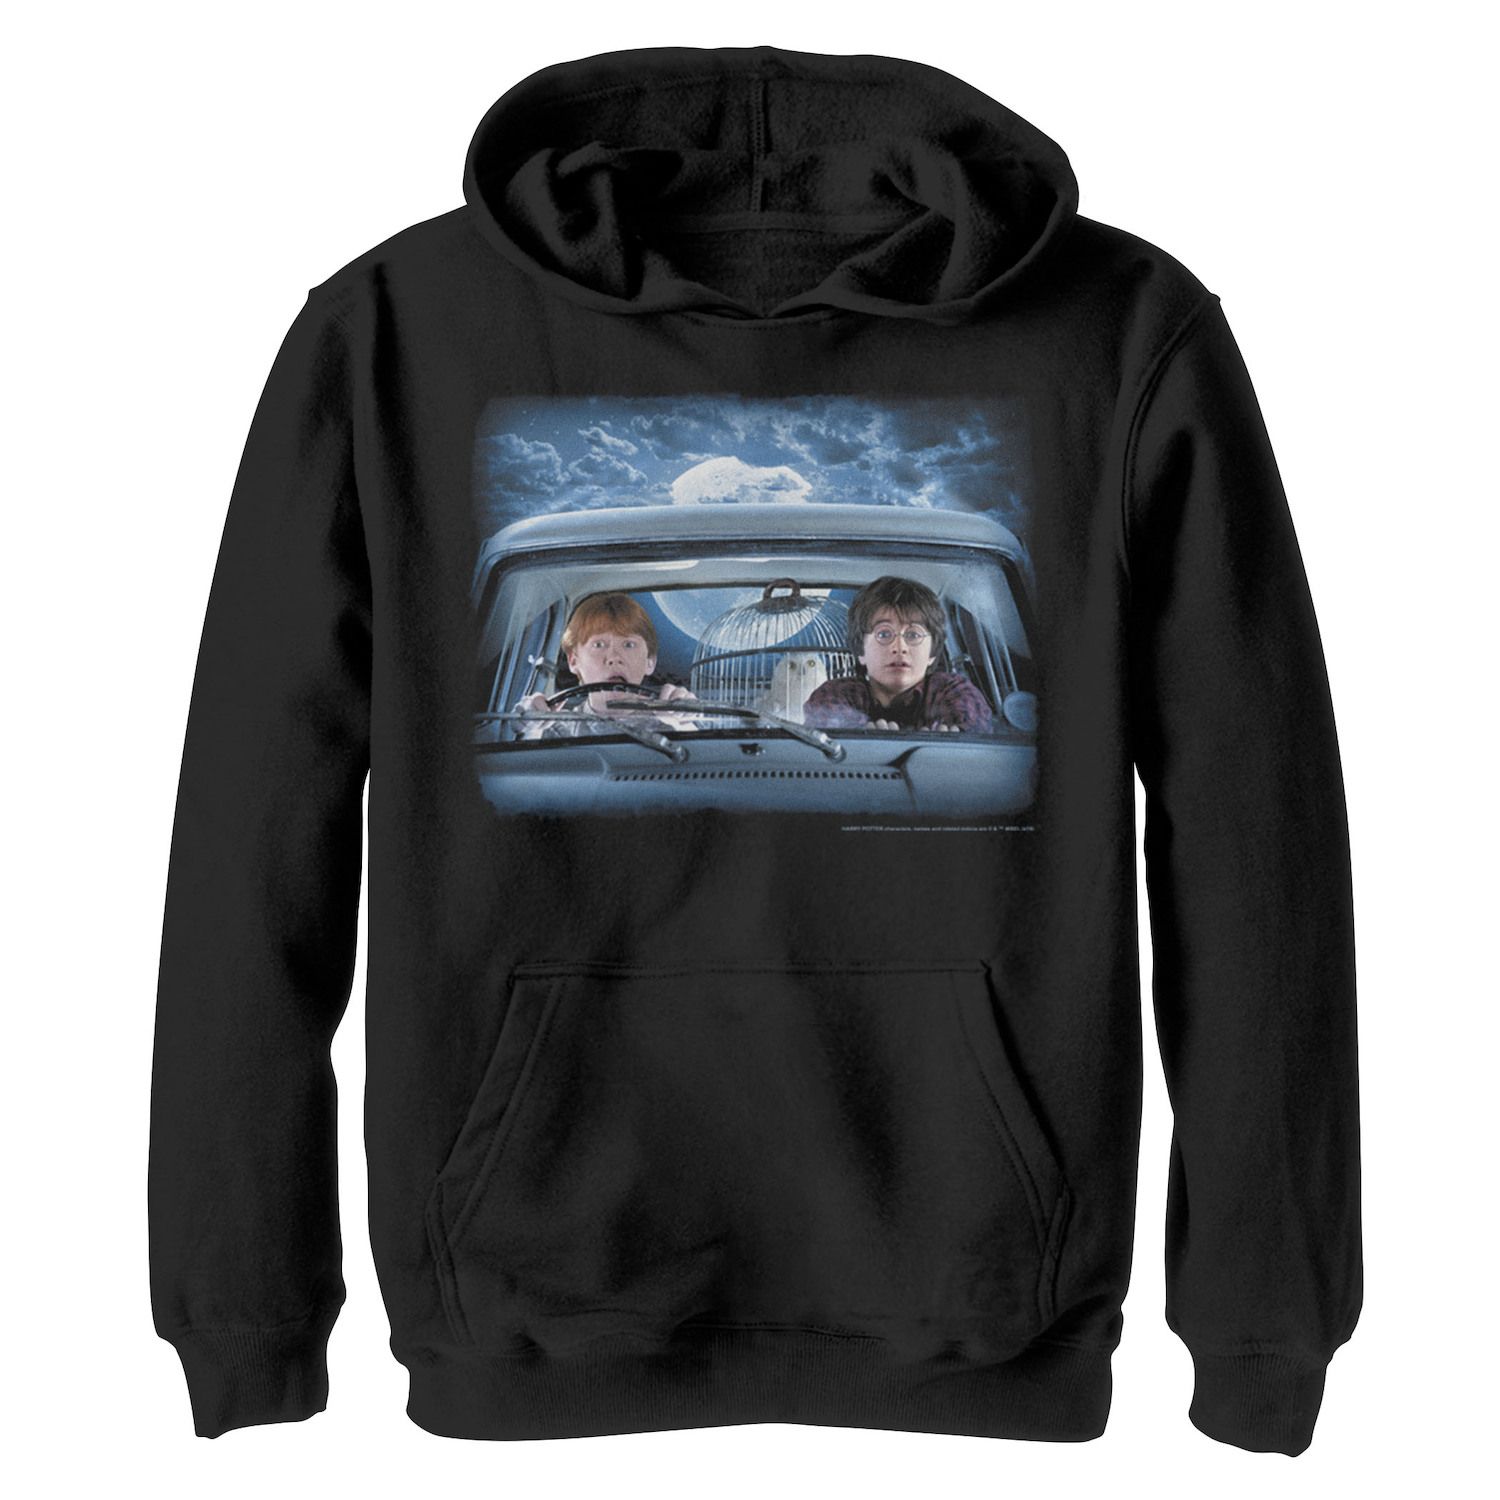 Image for Harry Potter Boys 8-20 Ron & Harry In The Flying Car Graphic Fleece Hoodie at Kohl's.